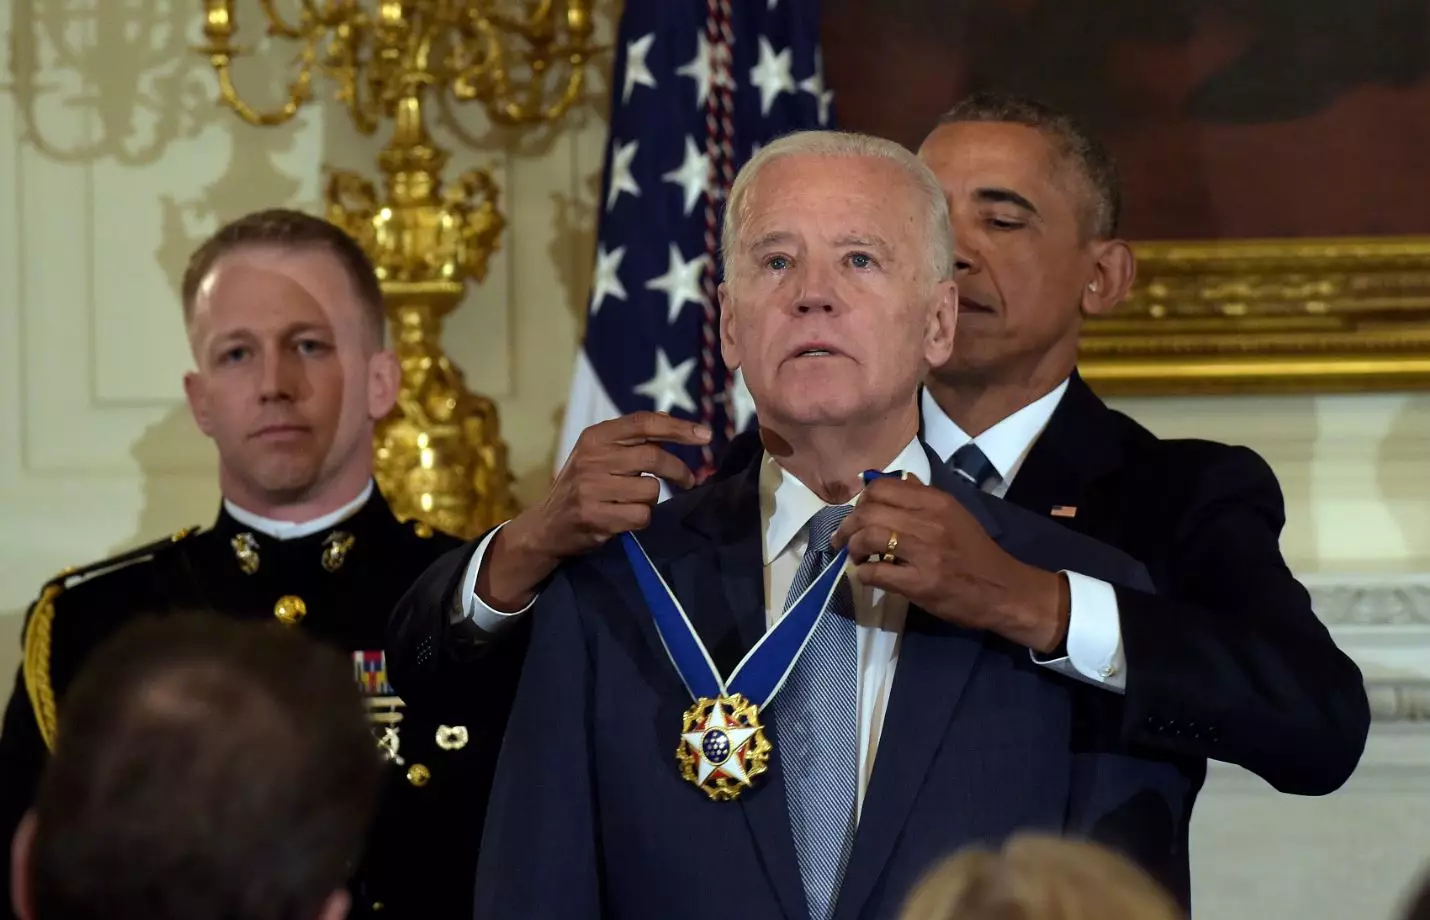 President Obama Surprises Joe Biden With Medal Of Freedom With Distinction